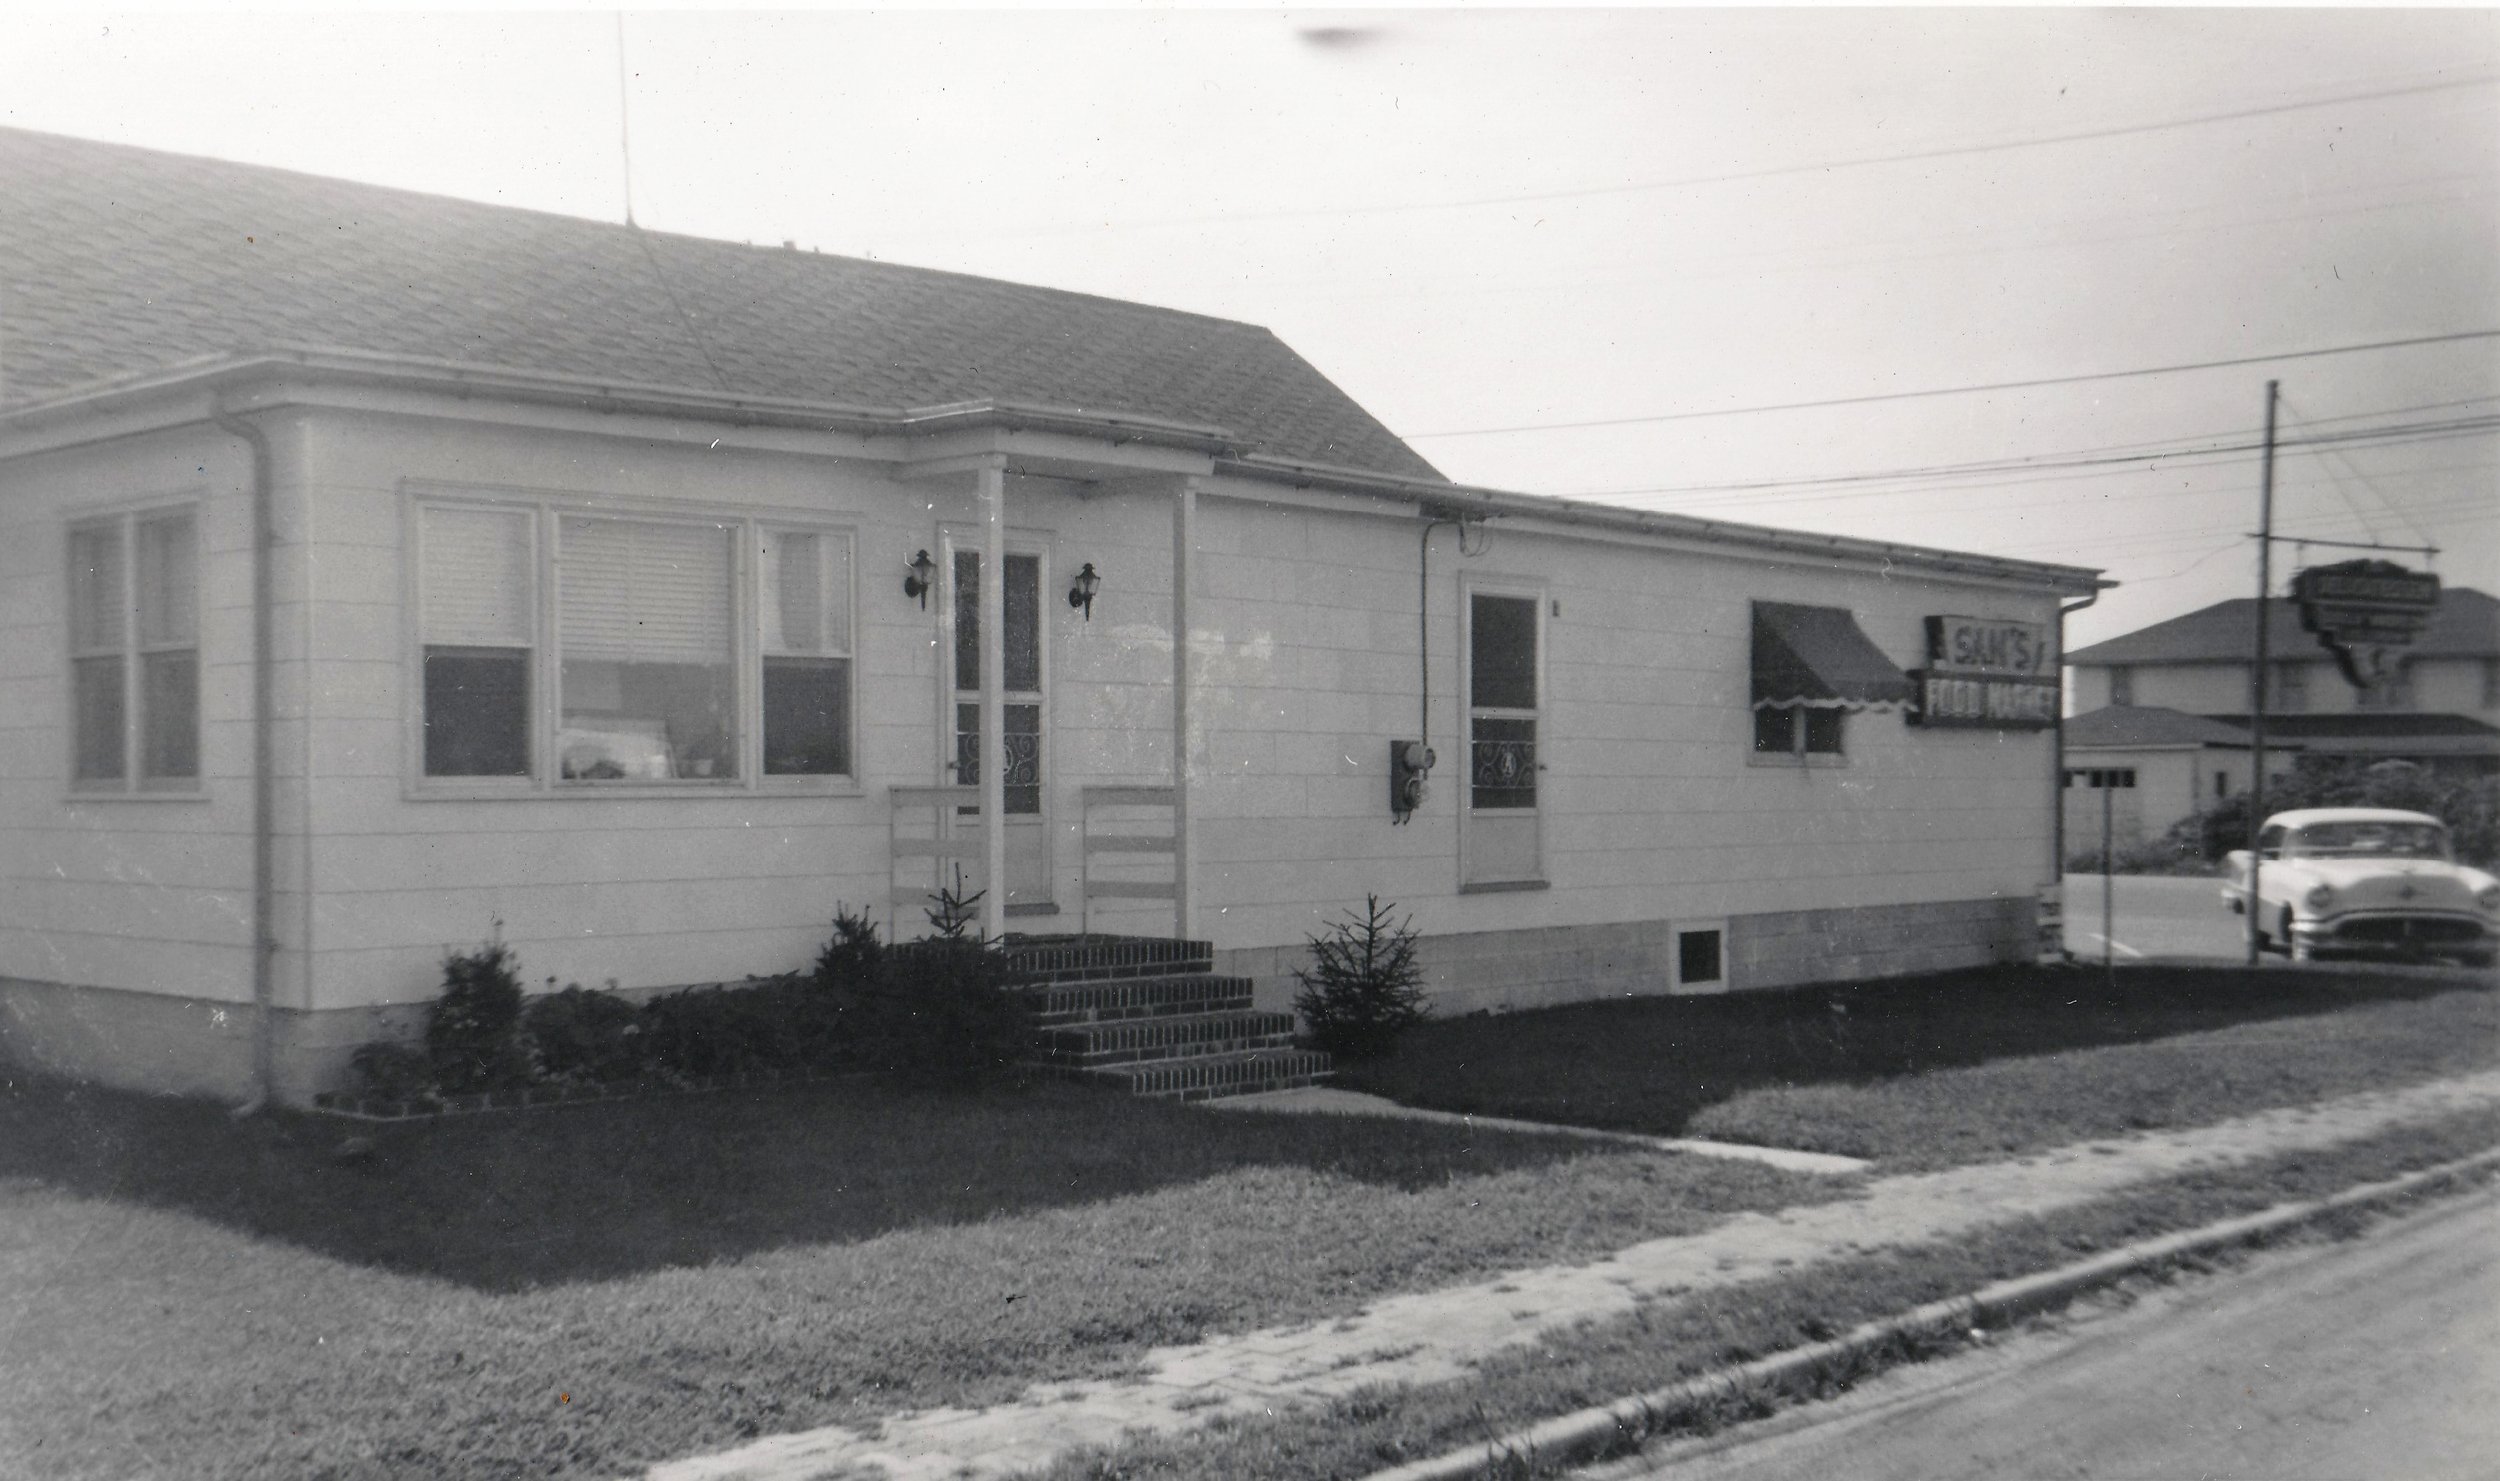 The Ascolese family home from 30th Street in 1956.